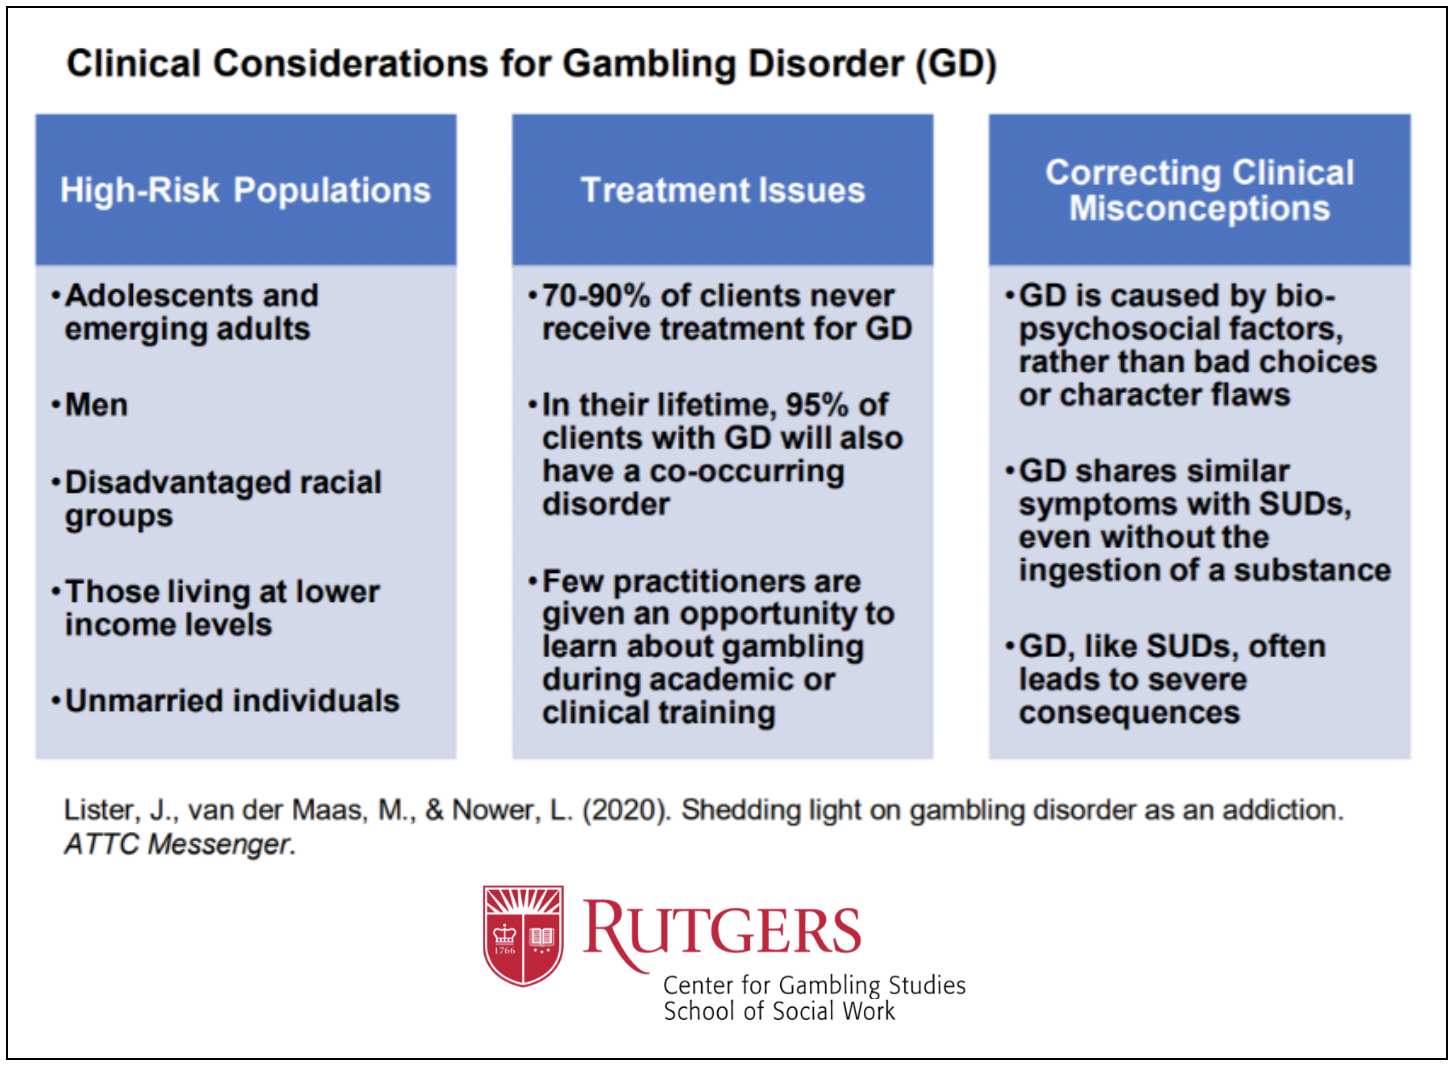 Clinical considerations for gambling disorder